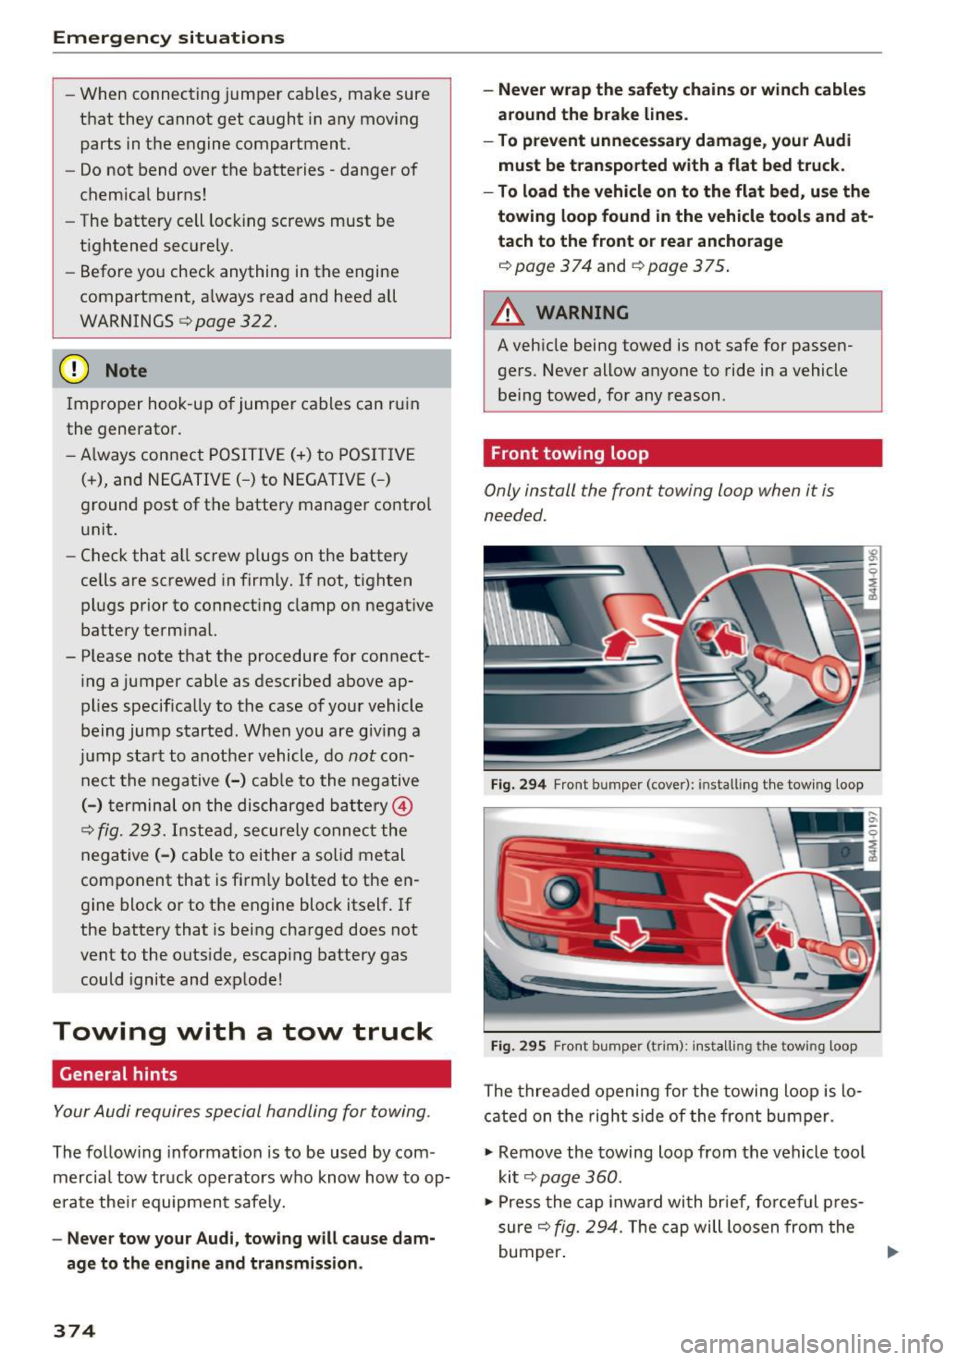 AUDI Q7 2017  Owner´s Manual Emergency situations 
-When  connecting  jumper  cables,  make  sure 
that  they  cannot  get  caught  in any  moving 
parts  in the  engine  compartment. 
- Do not  bend  over  the  batteries -danger